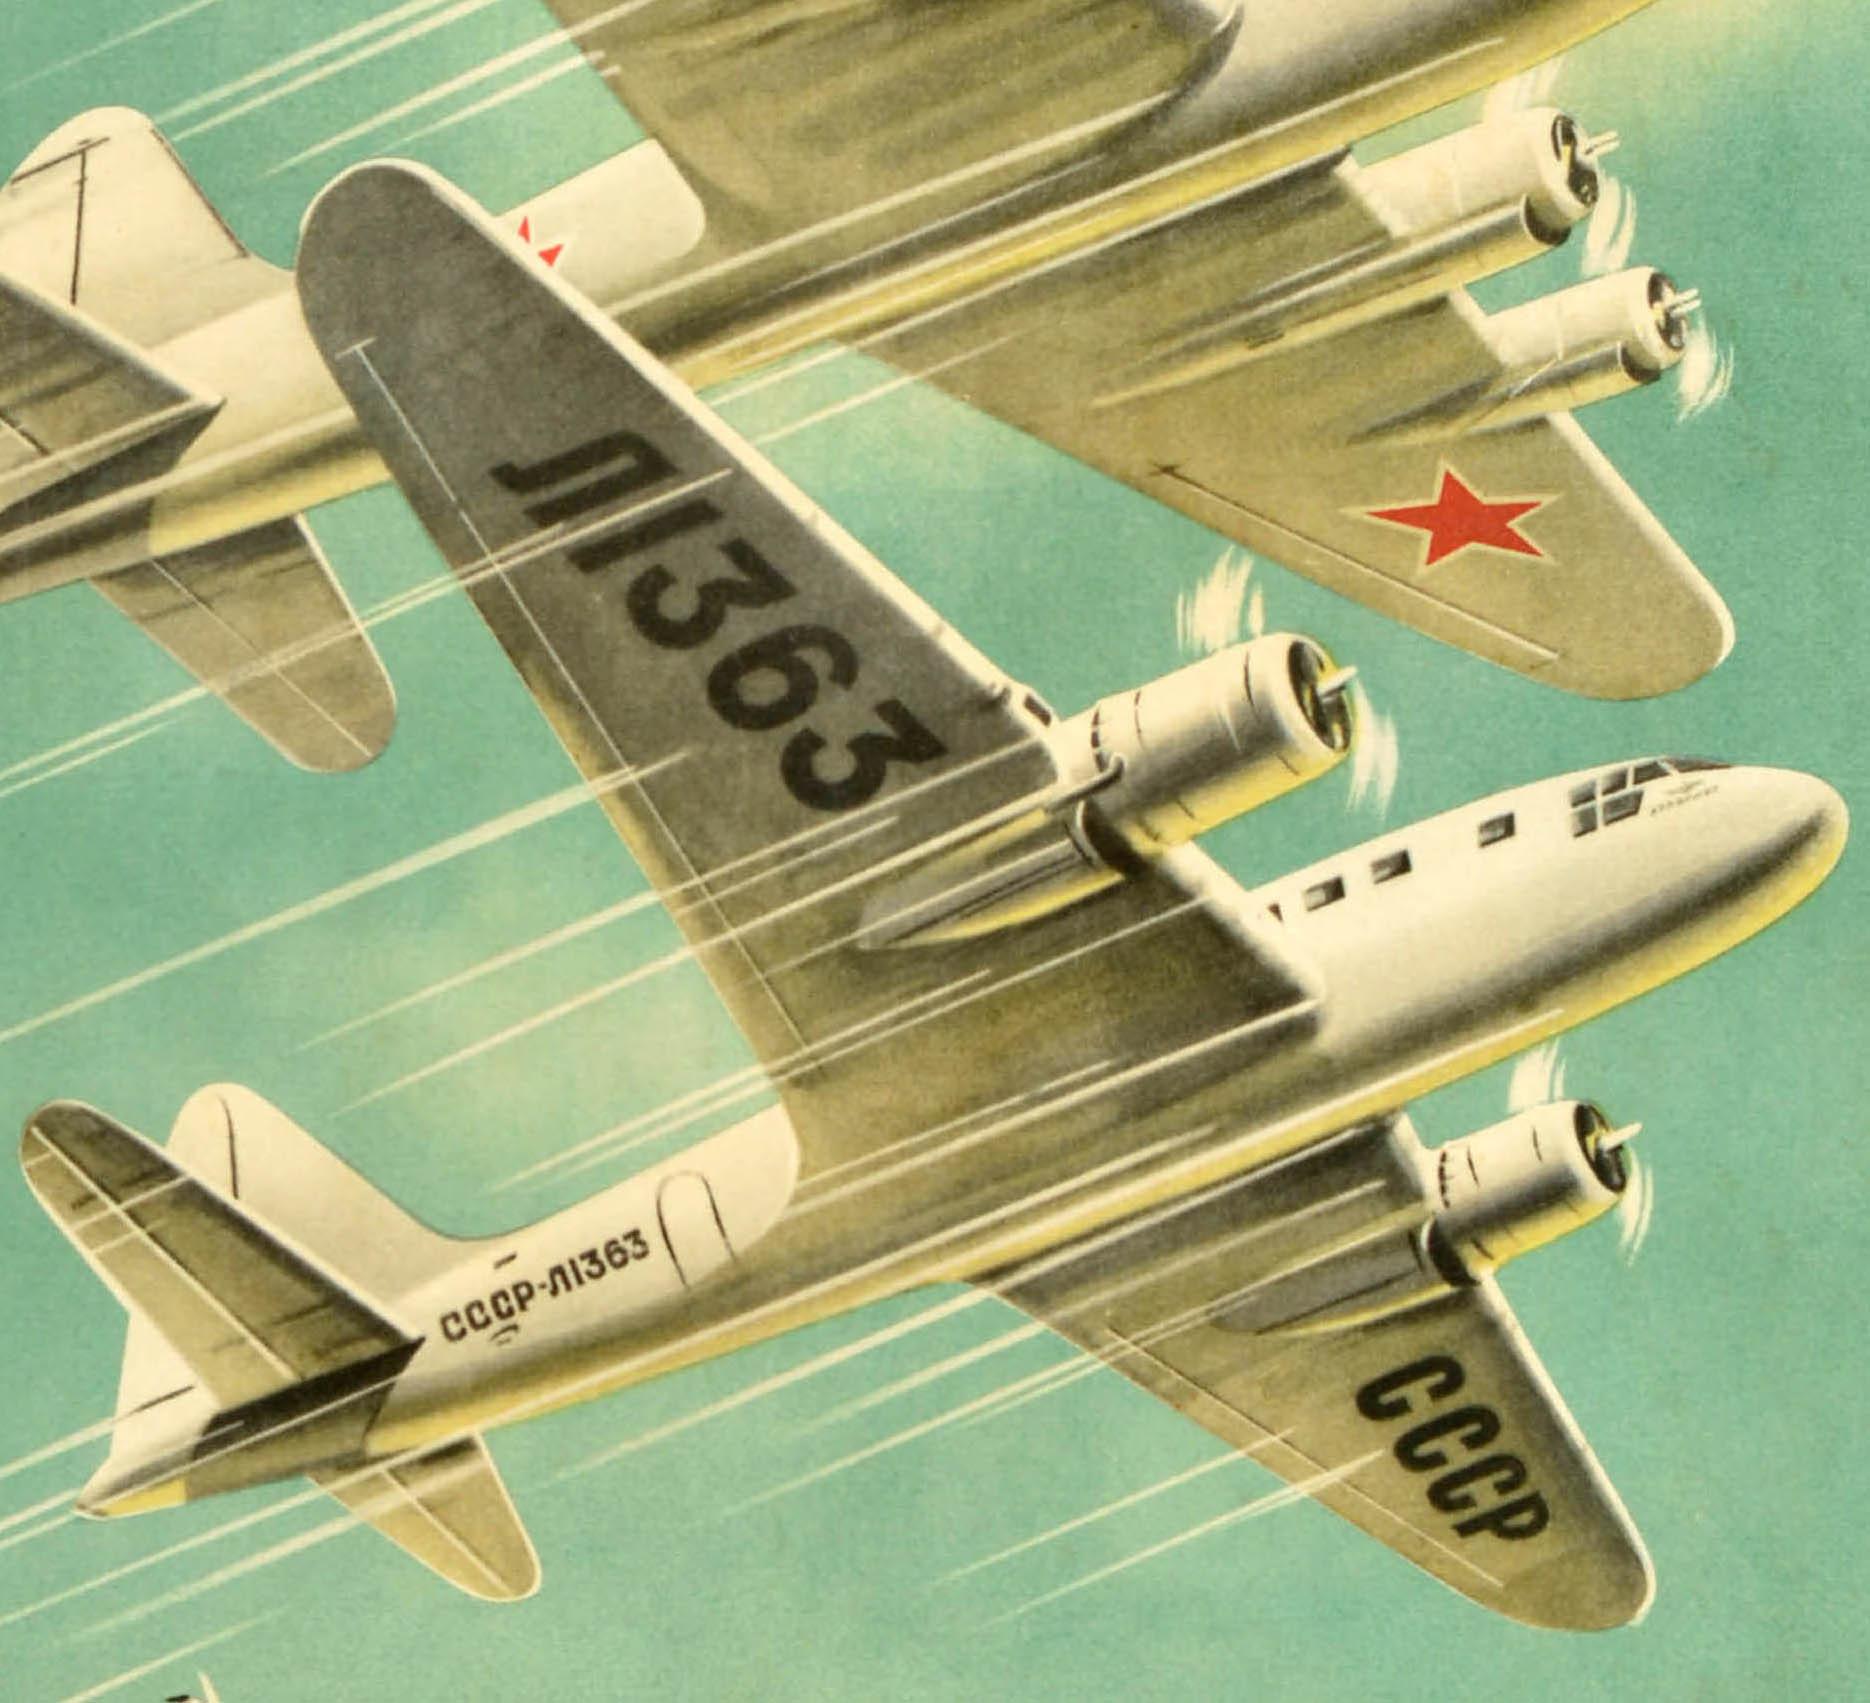 Original vintage propaganda poster - ????? ??????? ????????? ???????! Glory to the mighty Soviet aviation - featuring a dynamic image of jet and propeller air force and commercial passenger planes marked with red Soviet stars on their wings, one